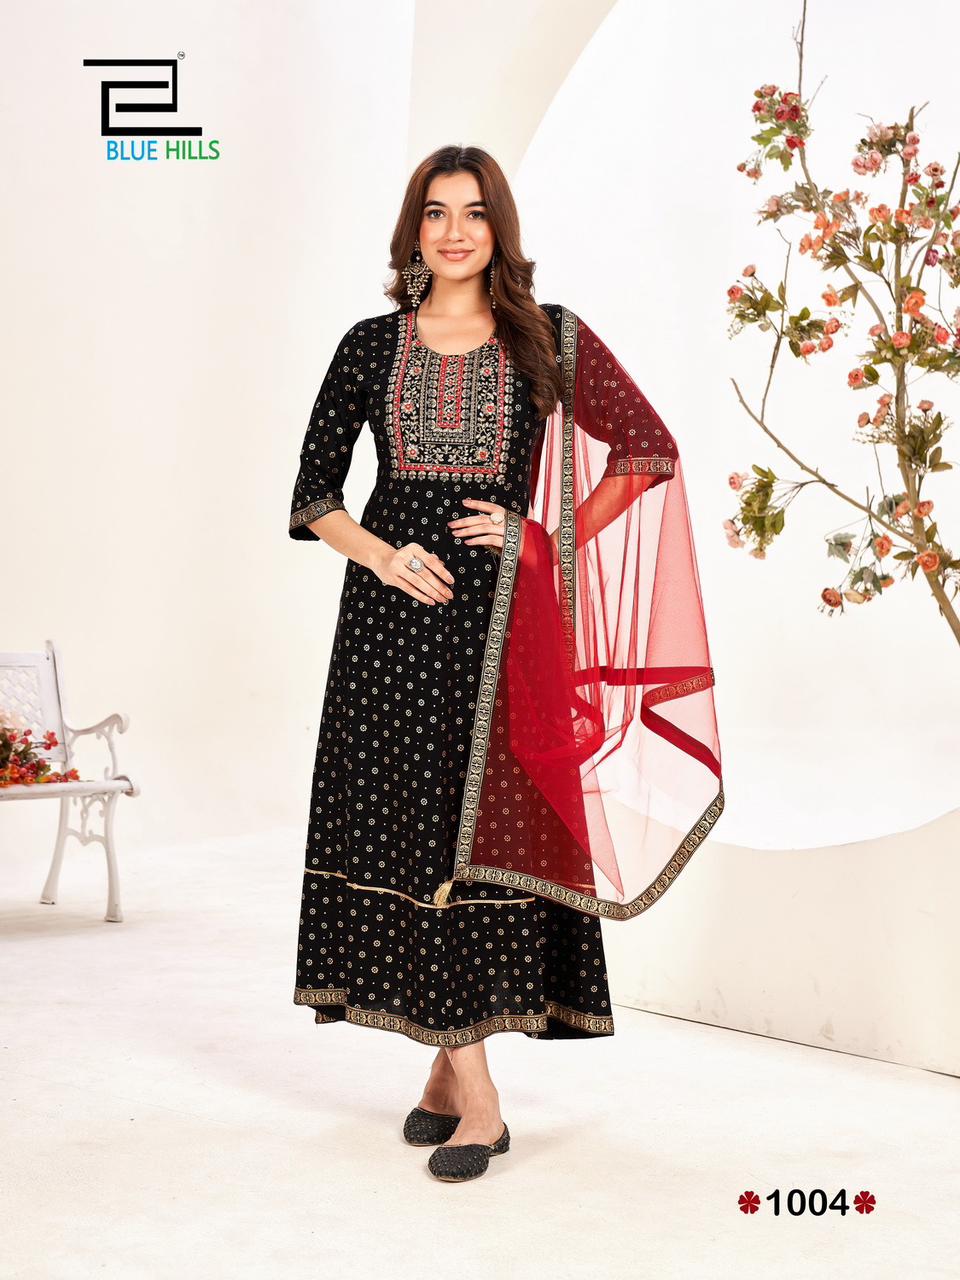 Blue Hills Manika Mage Hithe Vol 20 collection 2